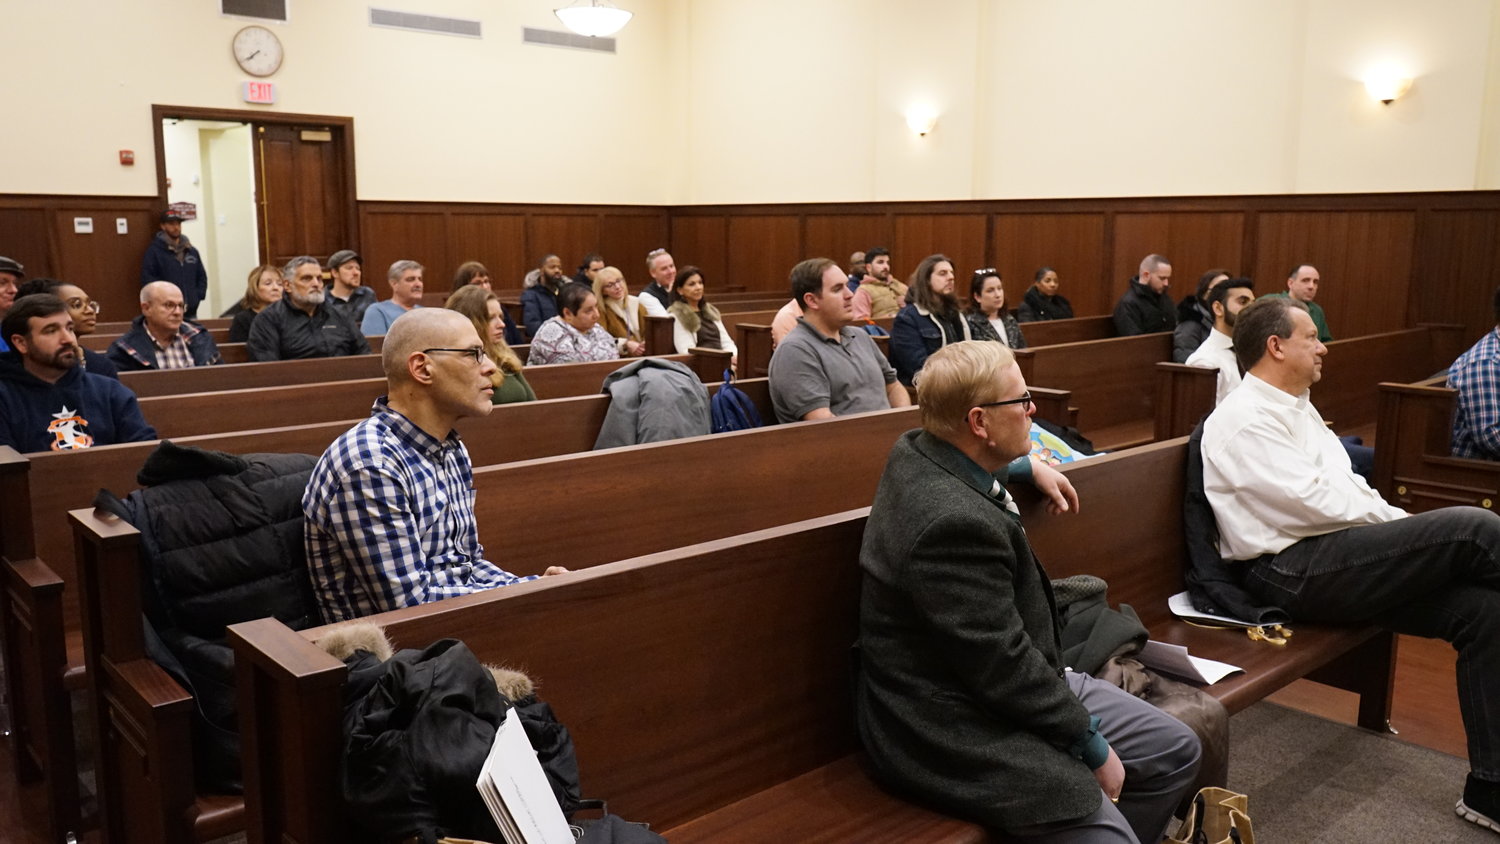 Members of Valley Stream’s Downtown Revitalization Task Force gathered at the village courthouse to hear about the methods three village mayors in Nassau County have employed to revitalize their downtowns.